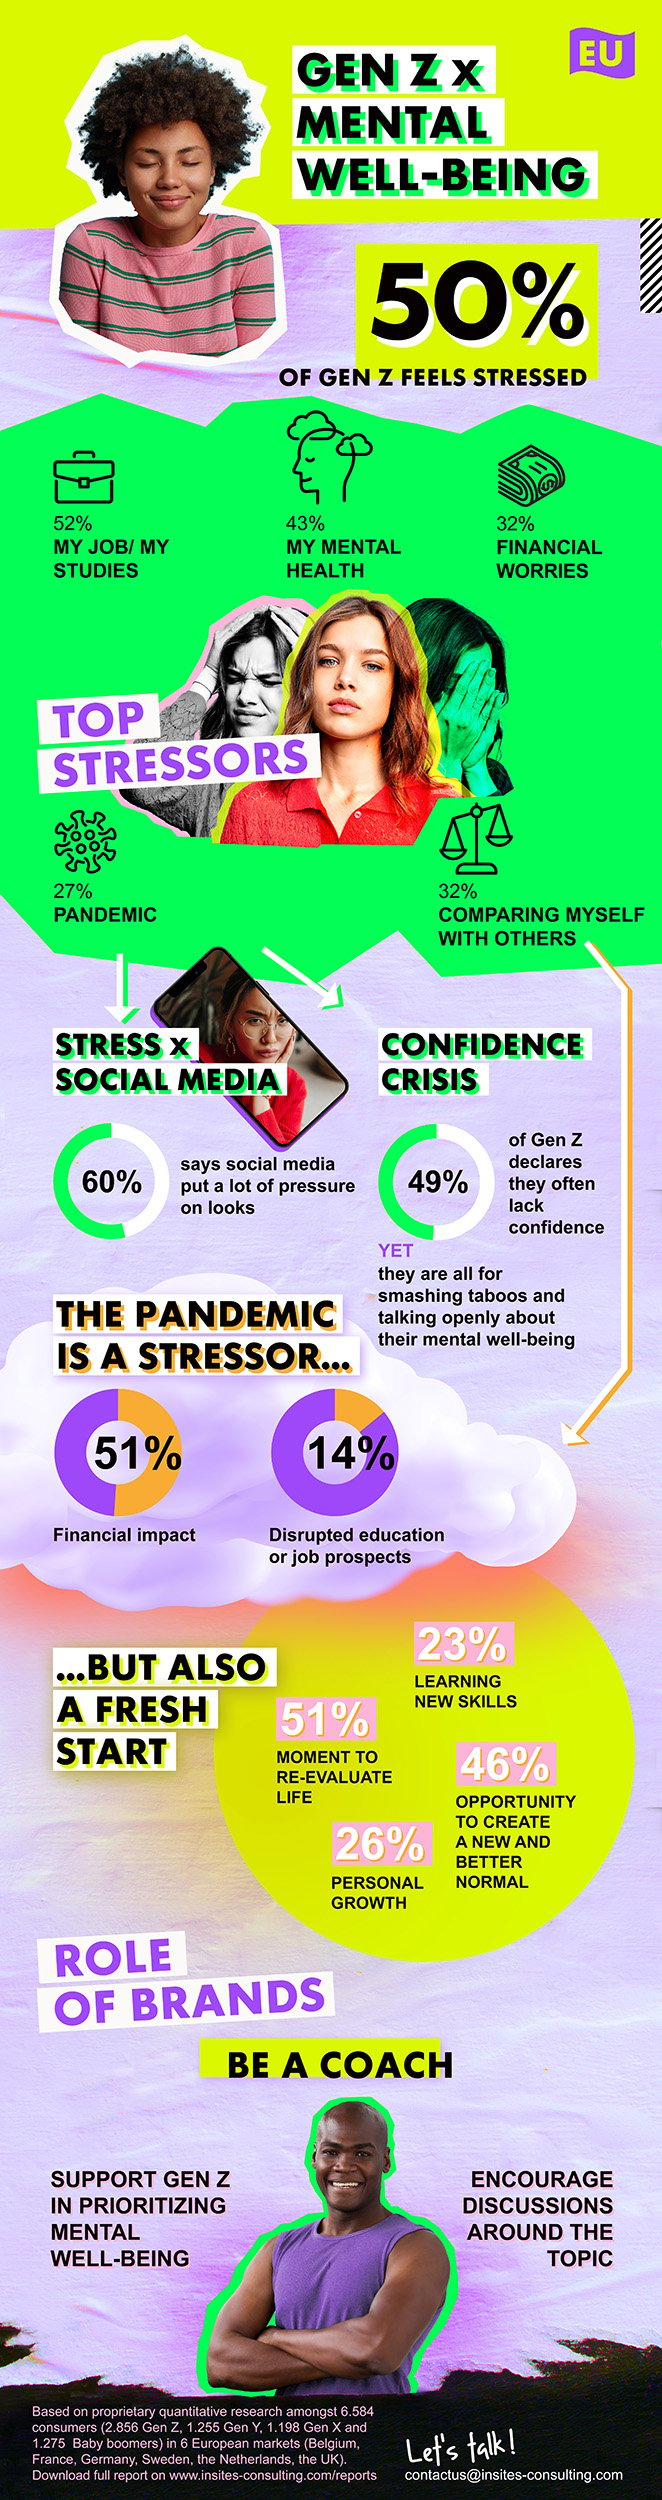 Gen Z Mental Well-being Infographic Europe